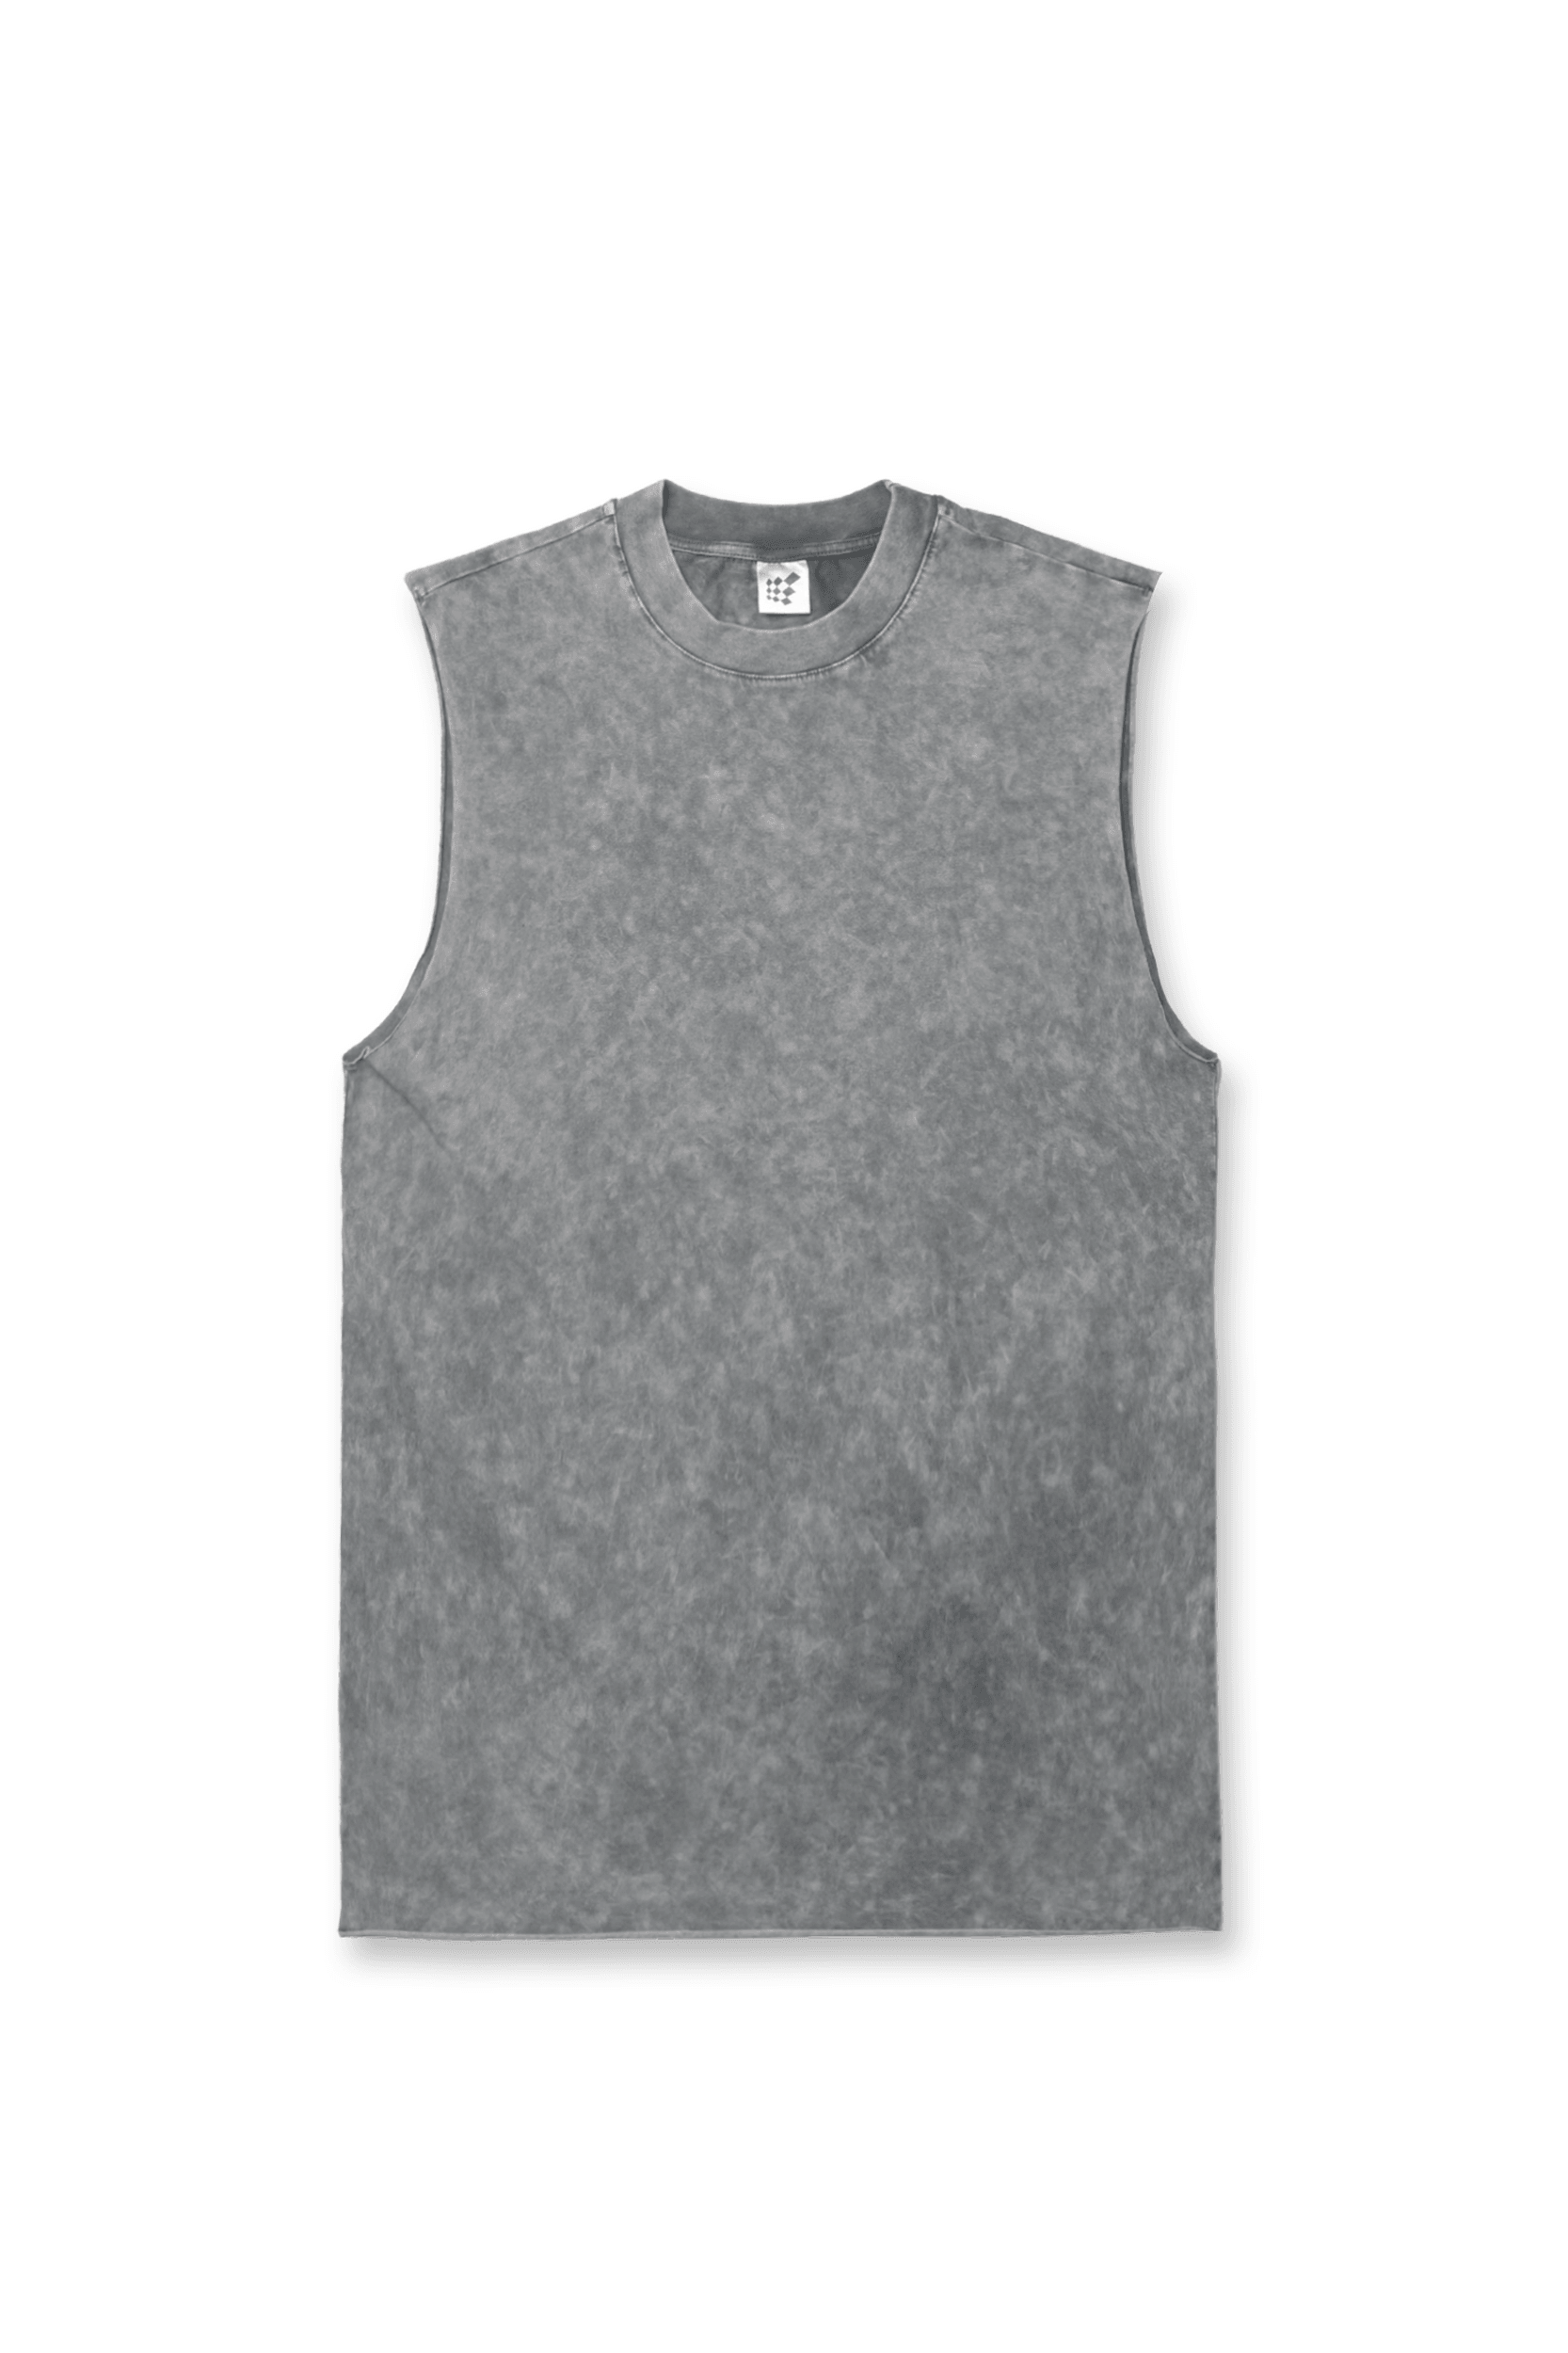 Raw Hem Vintage Washed Muscle Tee - Gray - Jed North